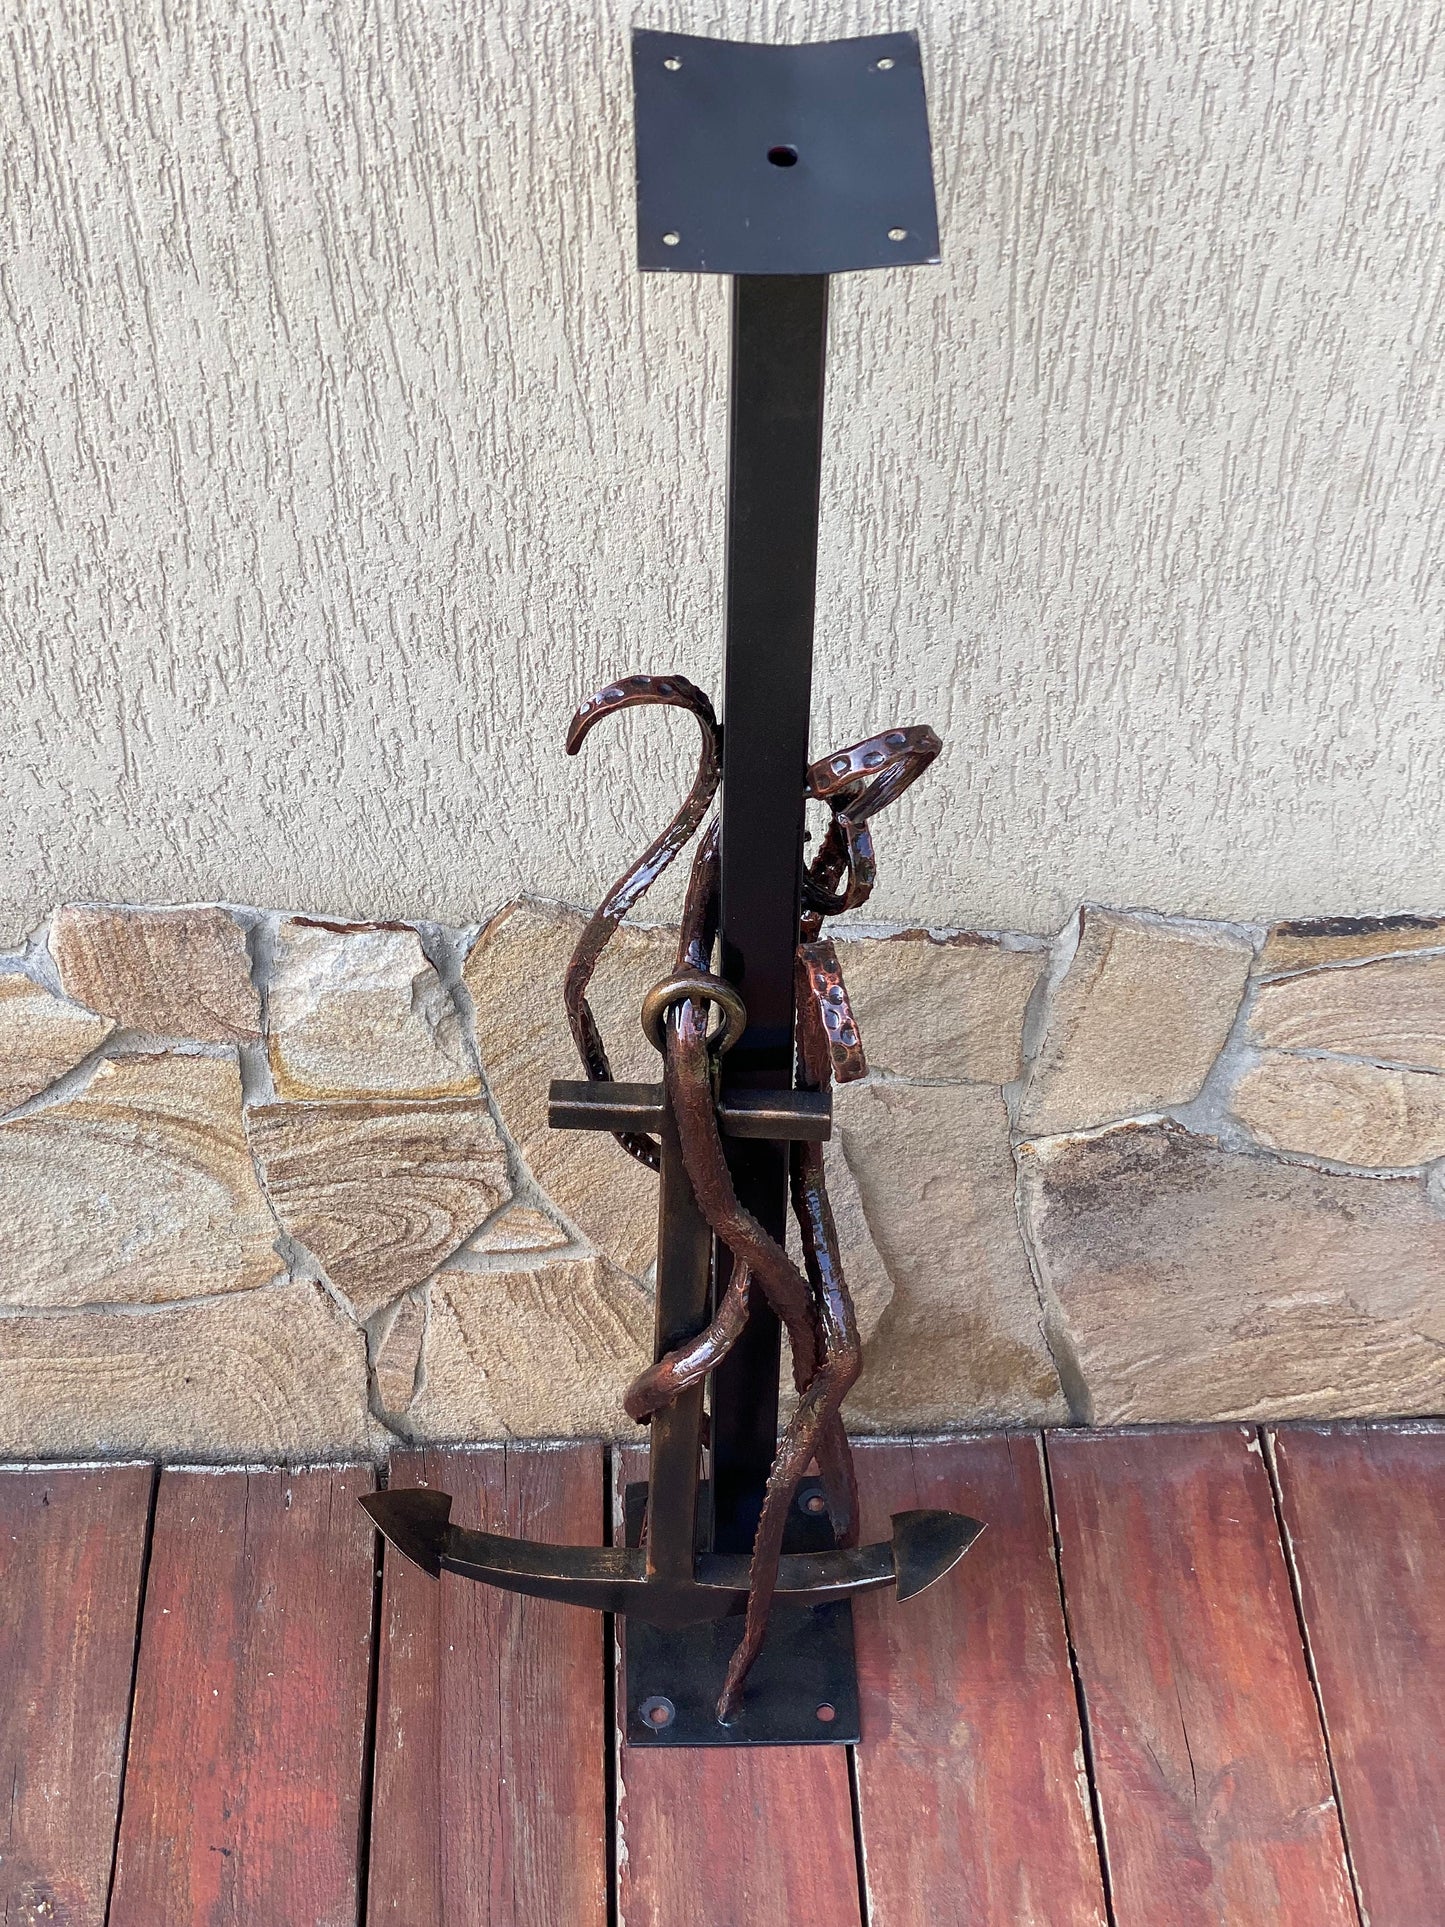 Stand, plant stand, holder, cake stand, tray, plant holder, shelf, display stand, octopus, tentacle, anchor, iron gift, 6th anniversary